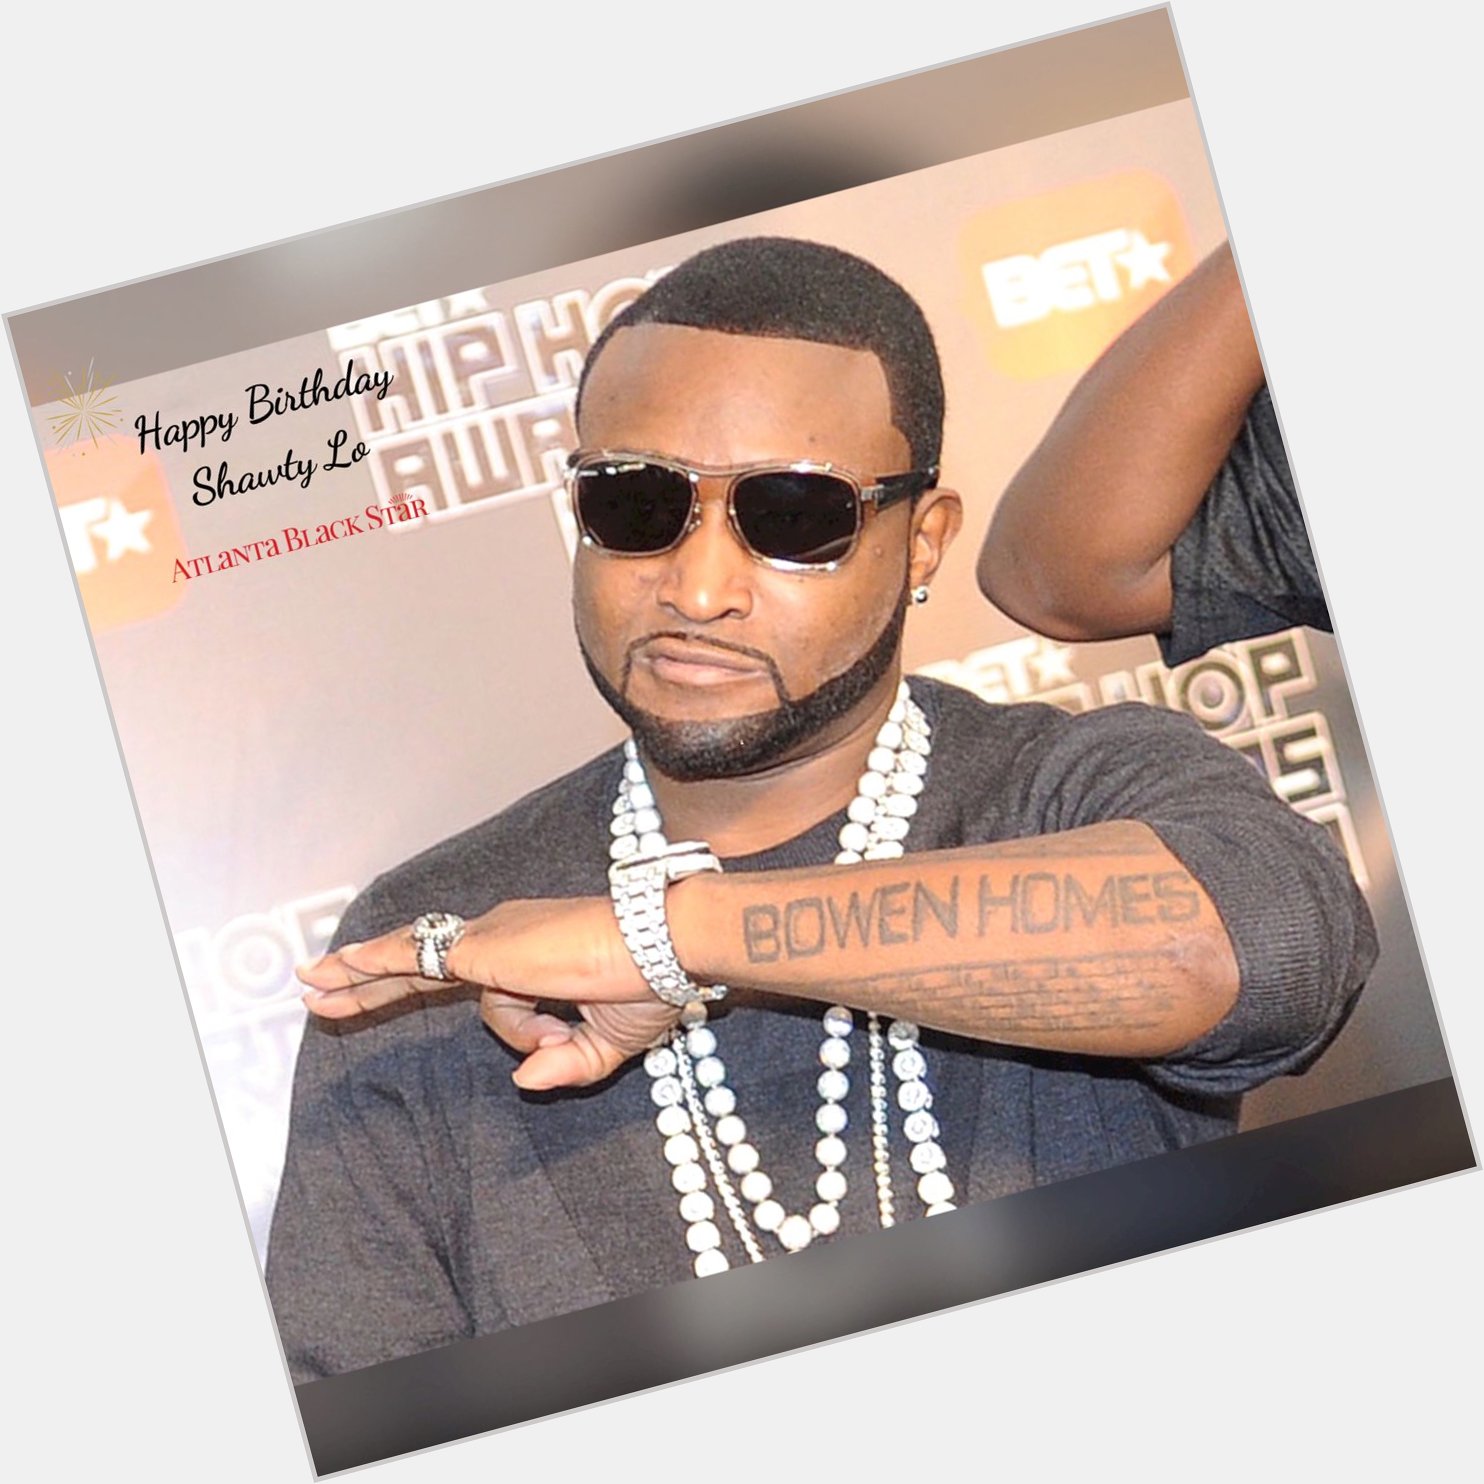 Happy birthday and rest in peace to Atlanta legend, rapper Shawty Lo! Prayers up  